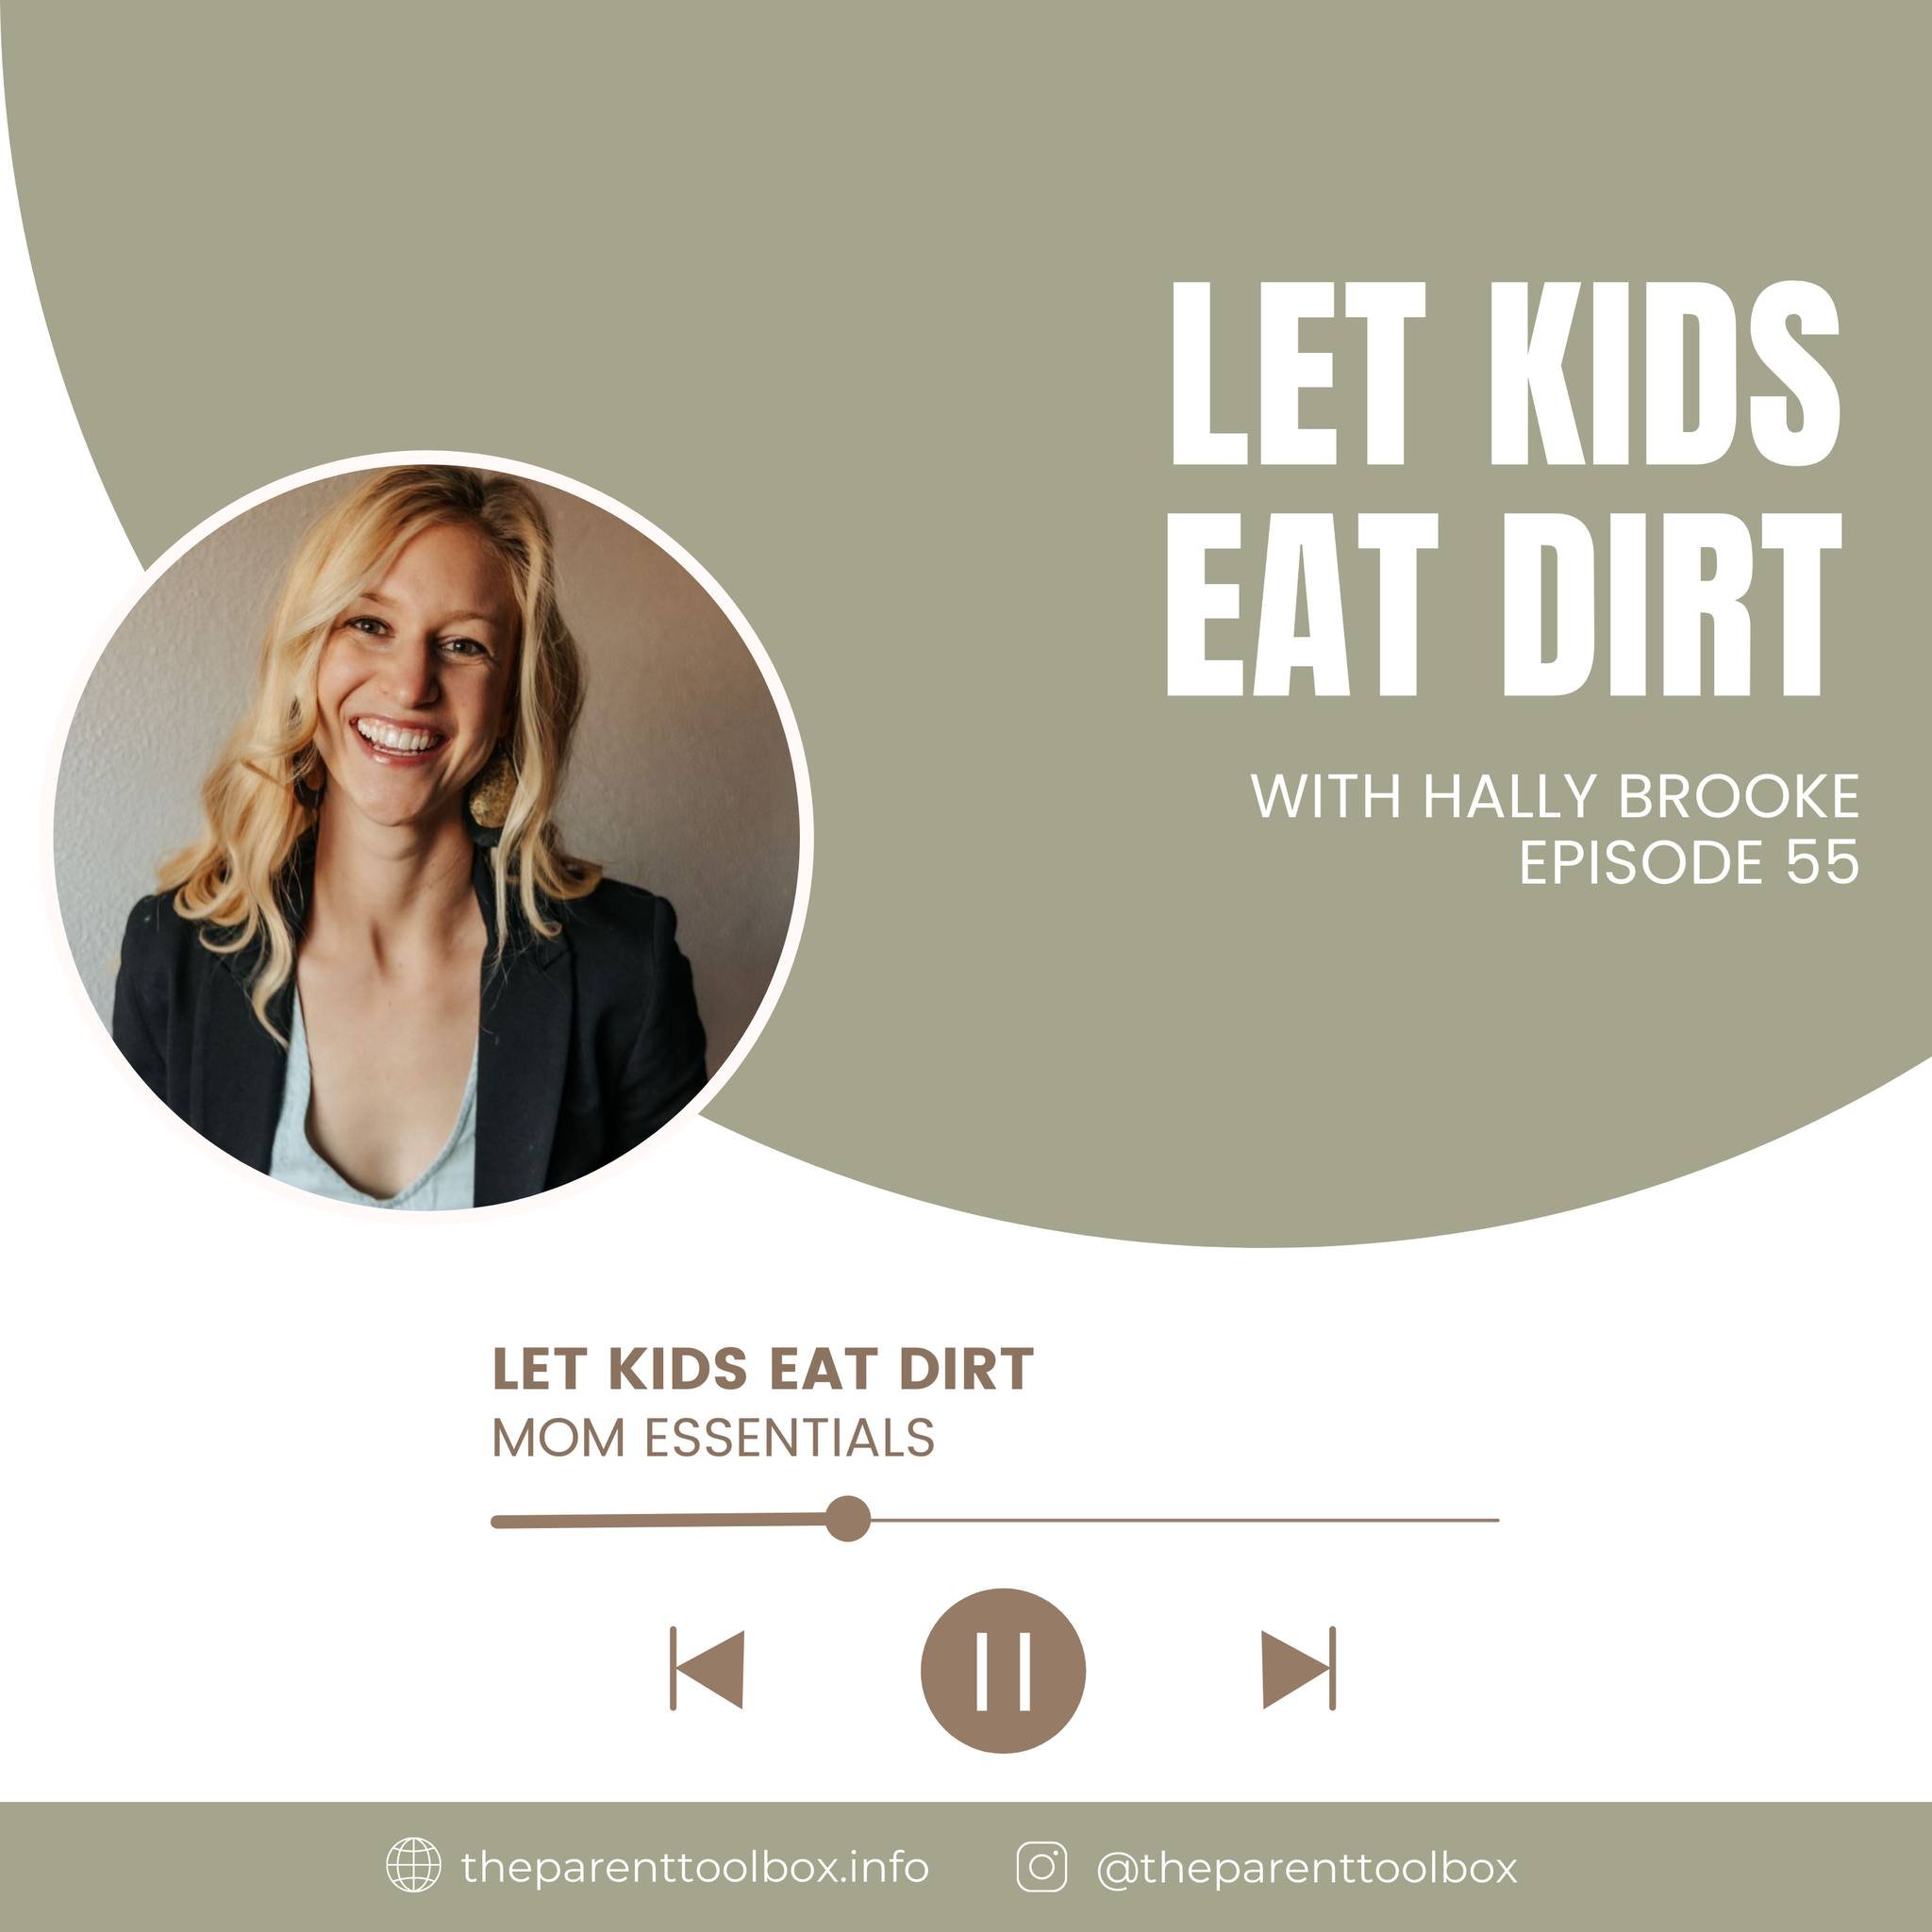 Shoutout to the #1 downloaded episode of Mom Essentials! 📣 

In this episode, @livenourishedcoaching and I dig into the truth about our guts, how to get picky eaters to actually eat healthy foods, and debunk myths about the bacteria in our bodies! 
